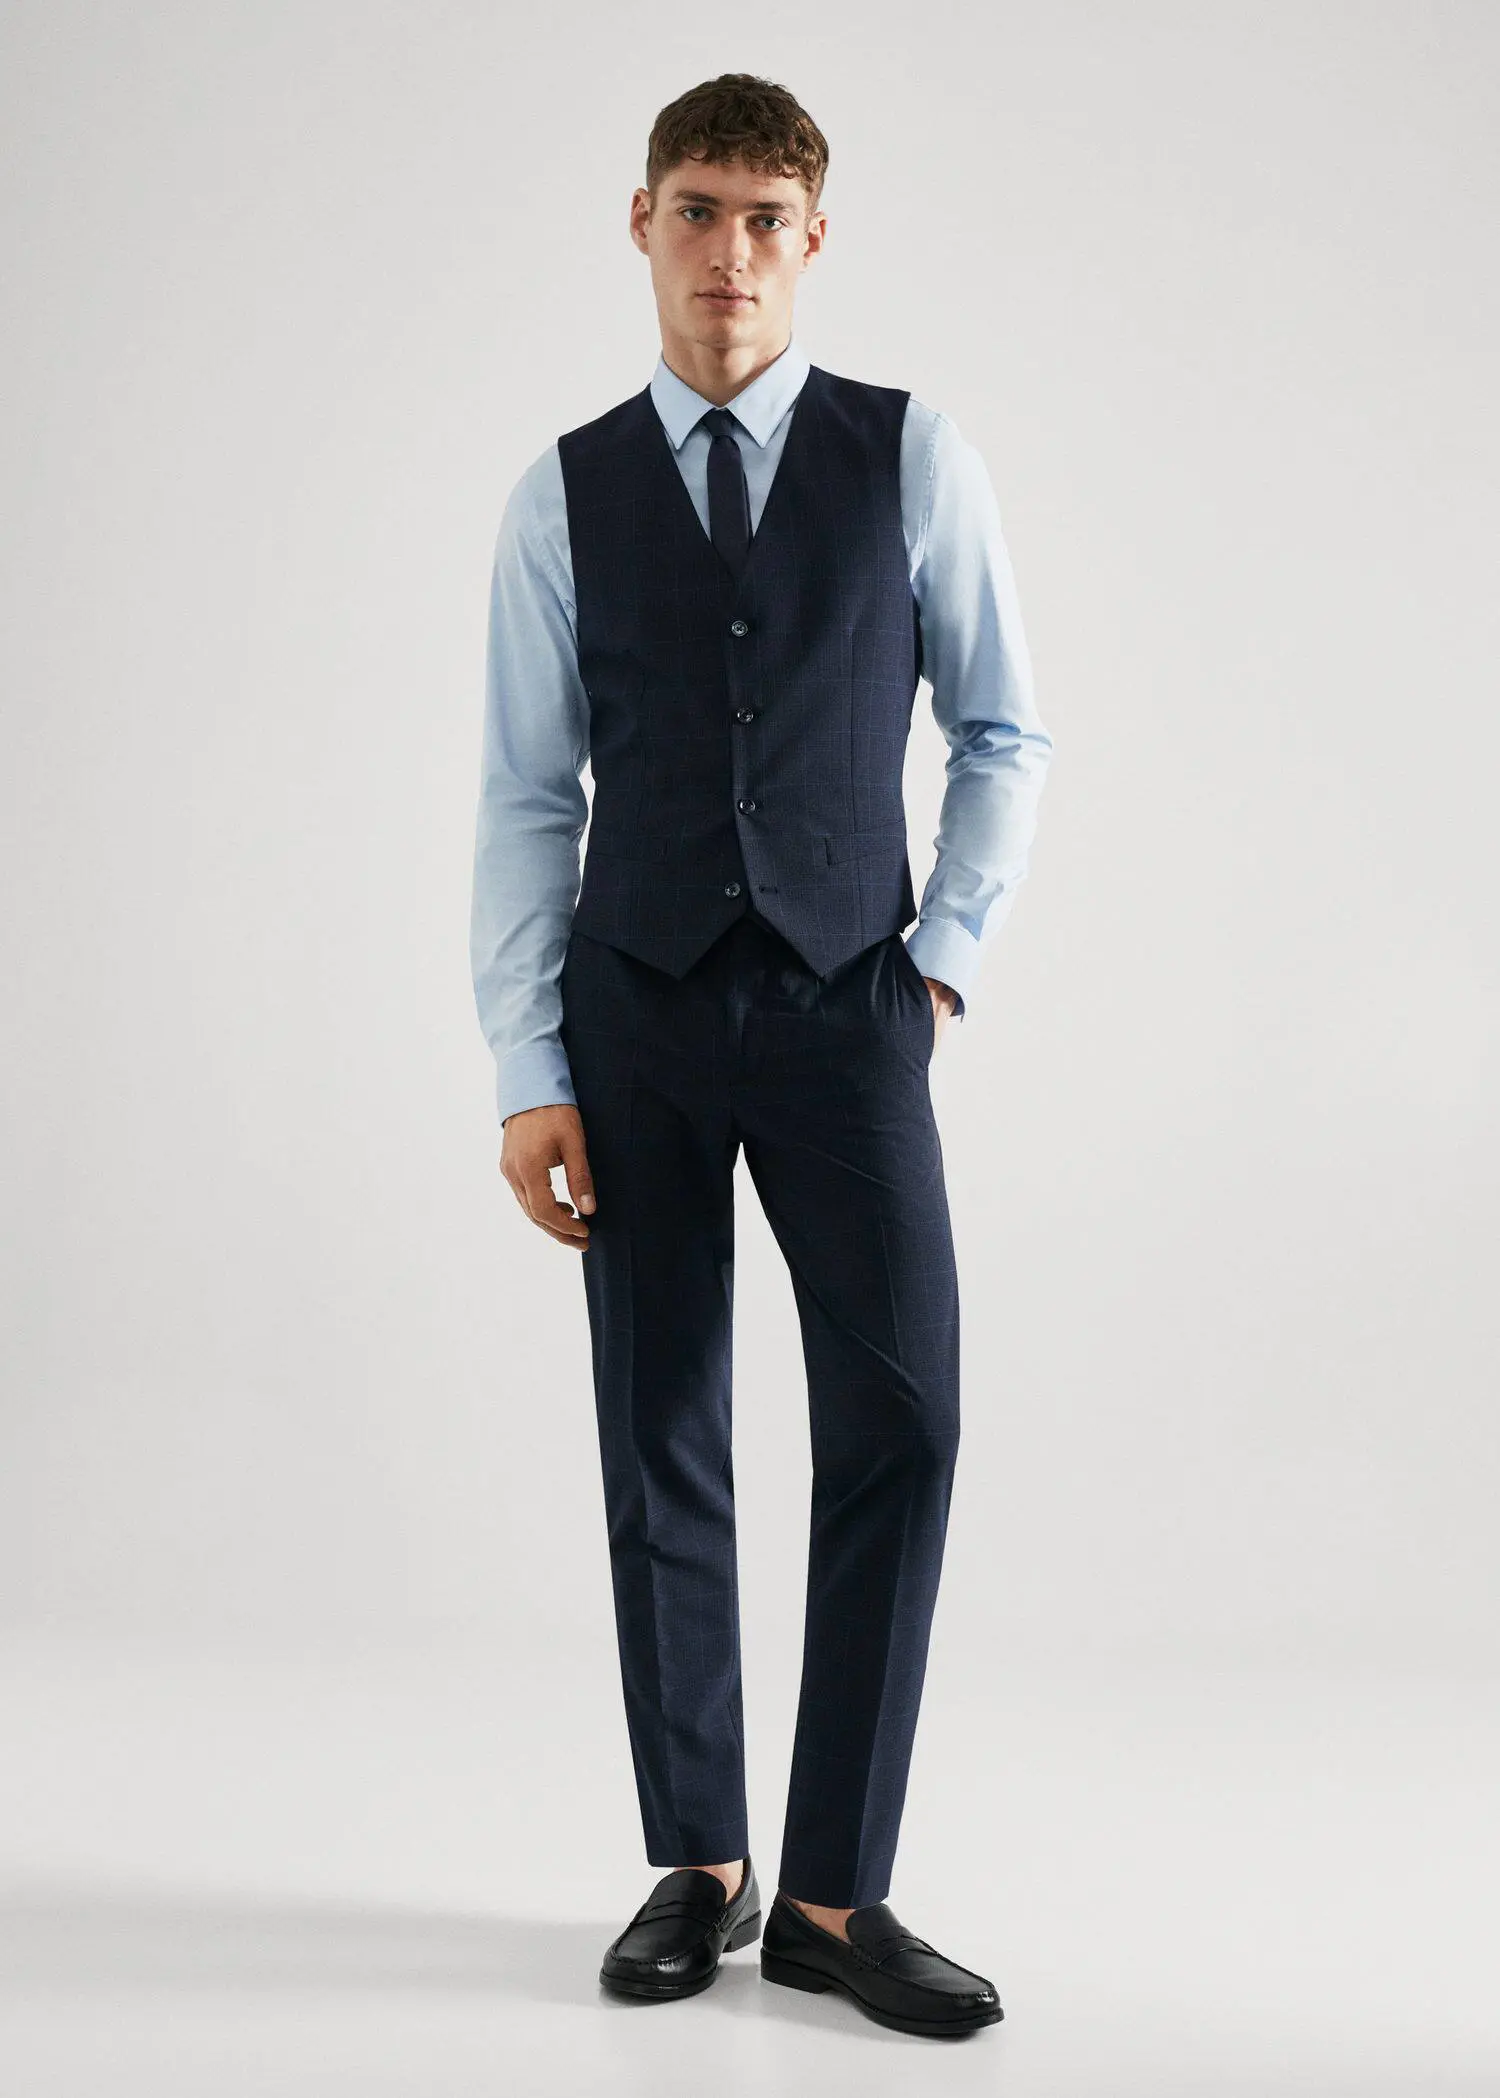 Mango Super slim-fit check suit vest. a man wearing a suit and tie standing in a room. 